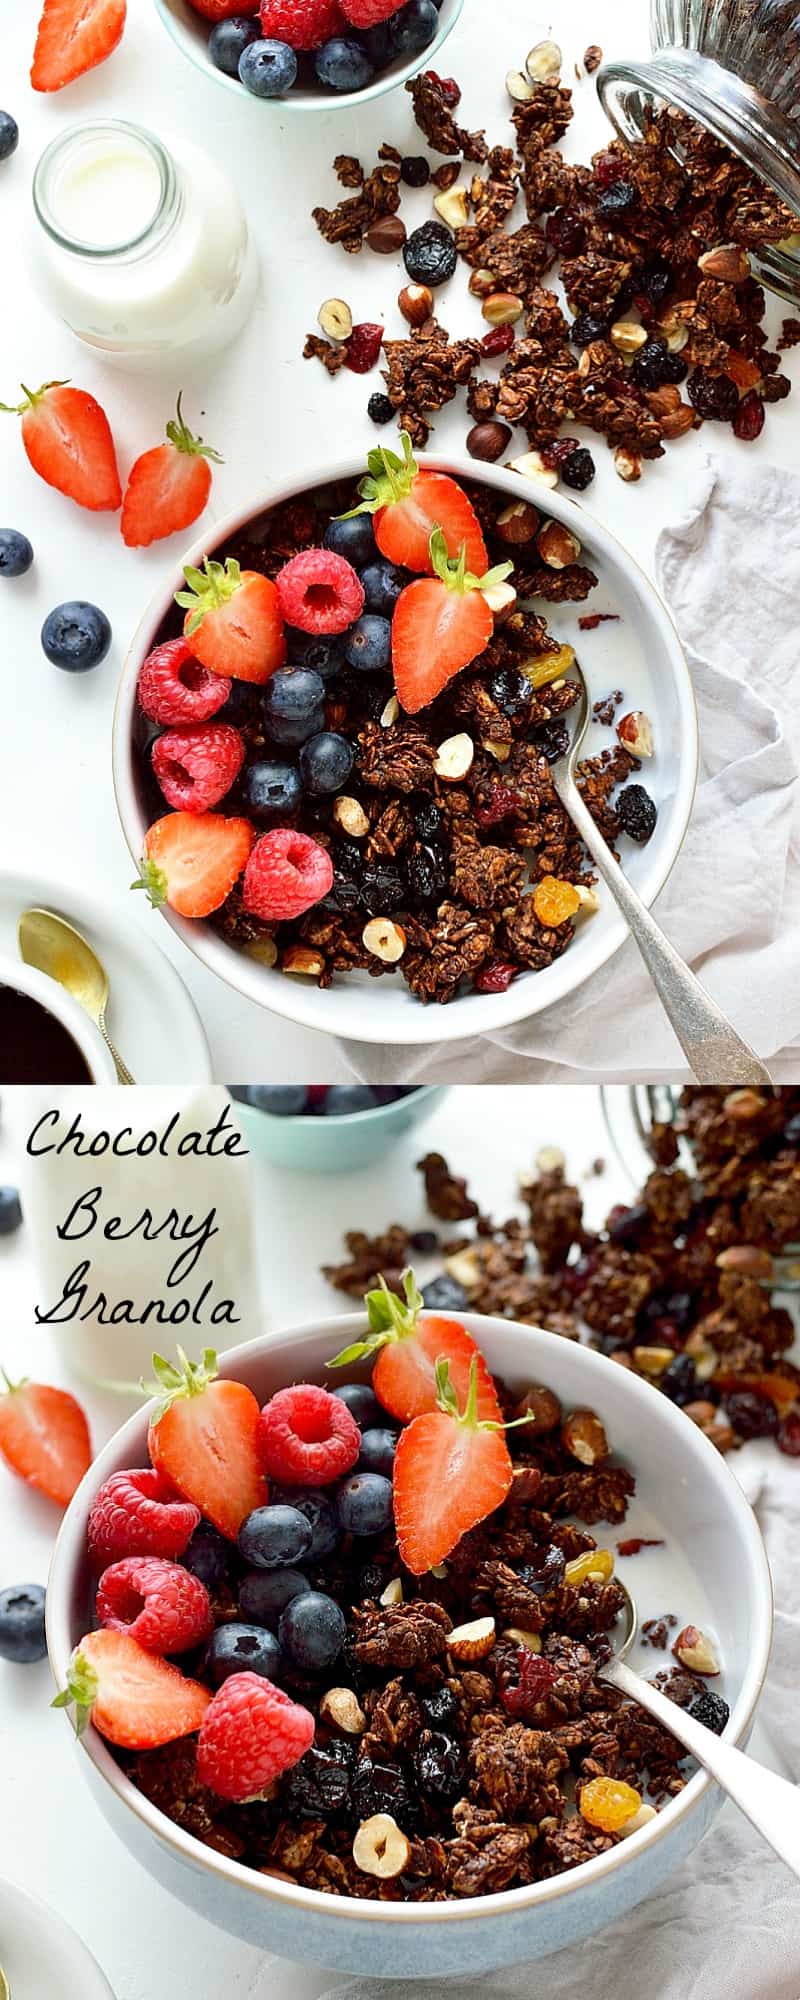 Chocolate berry granola - a healthy way to eat chocolate for breakfast!